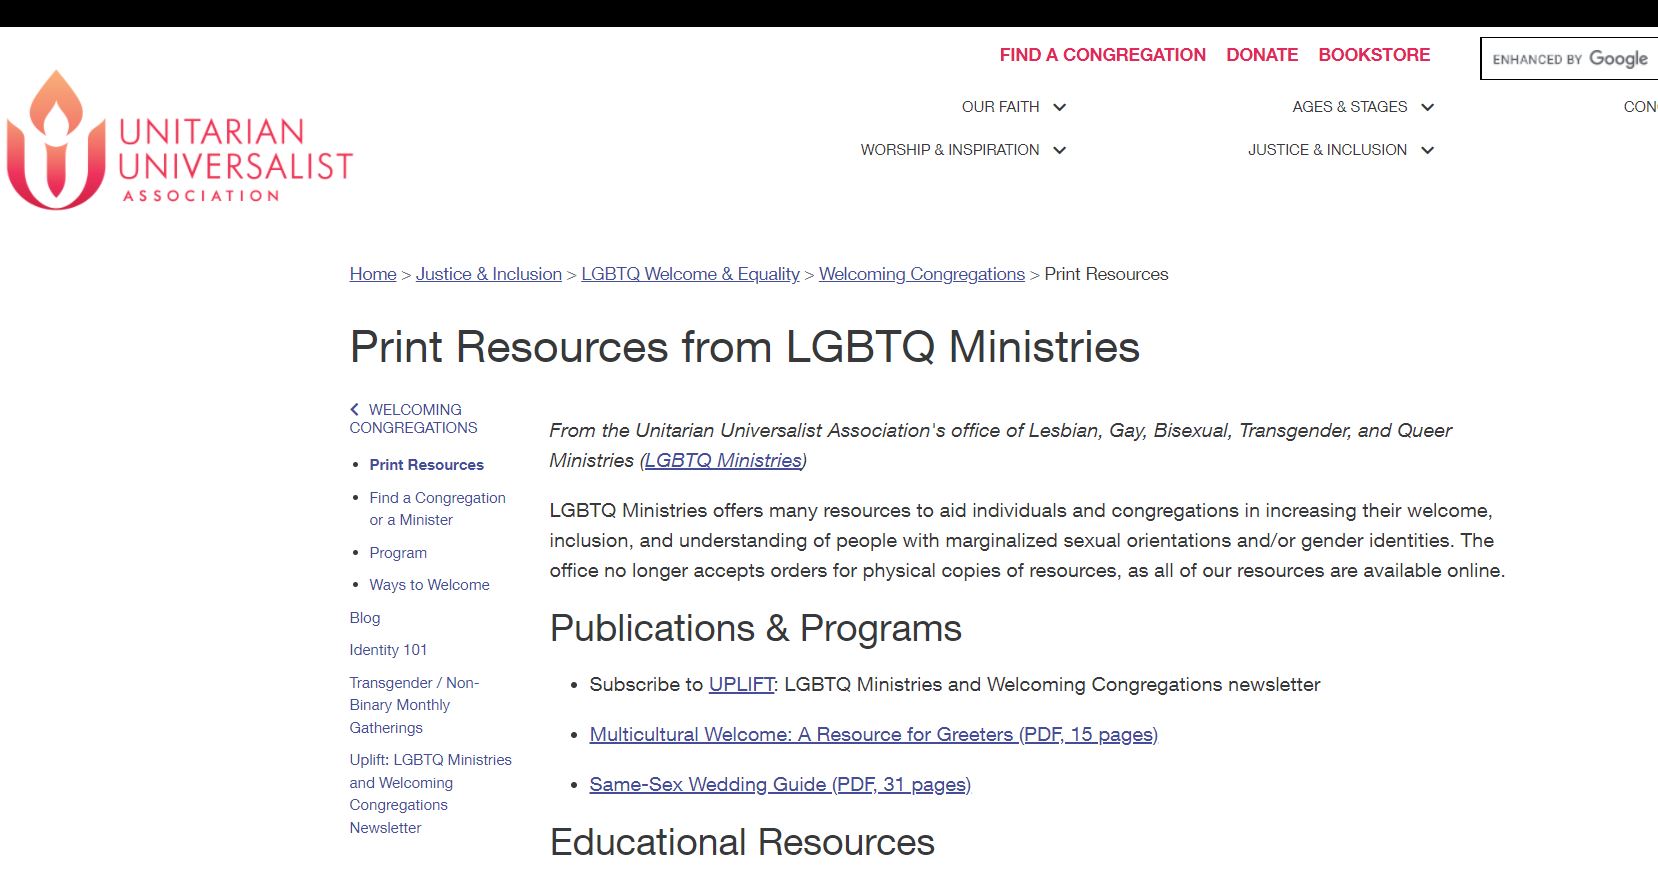 Unitarian Universalist Association: Lesbian, Gay, Bisexual, Transgender, and Queer Justice